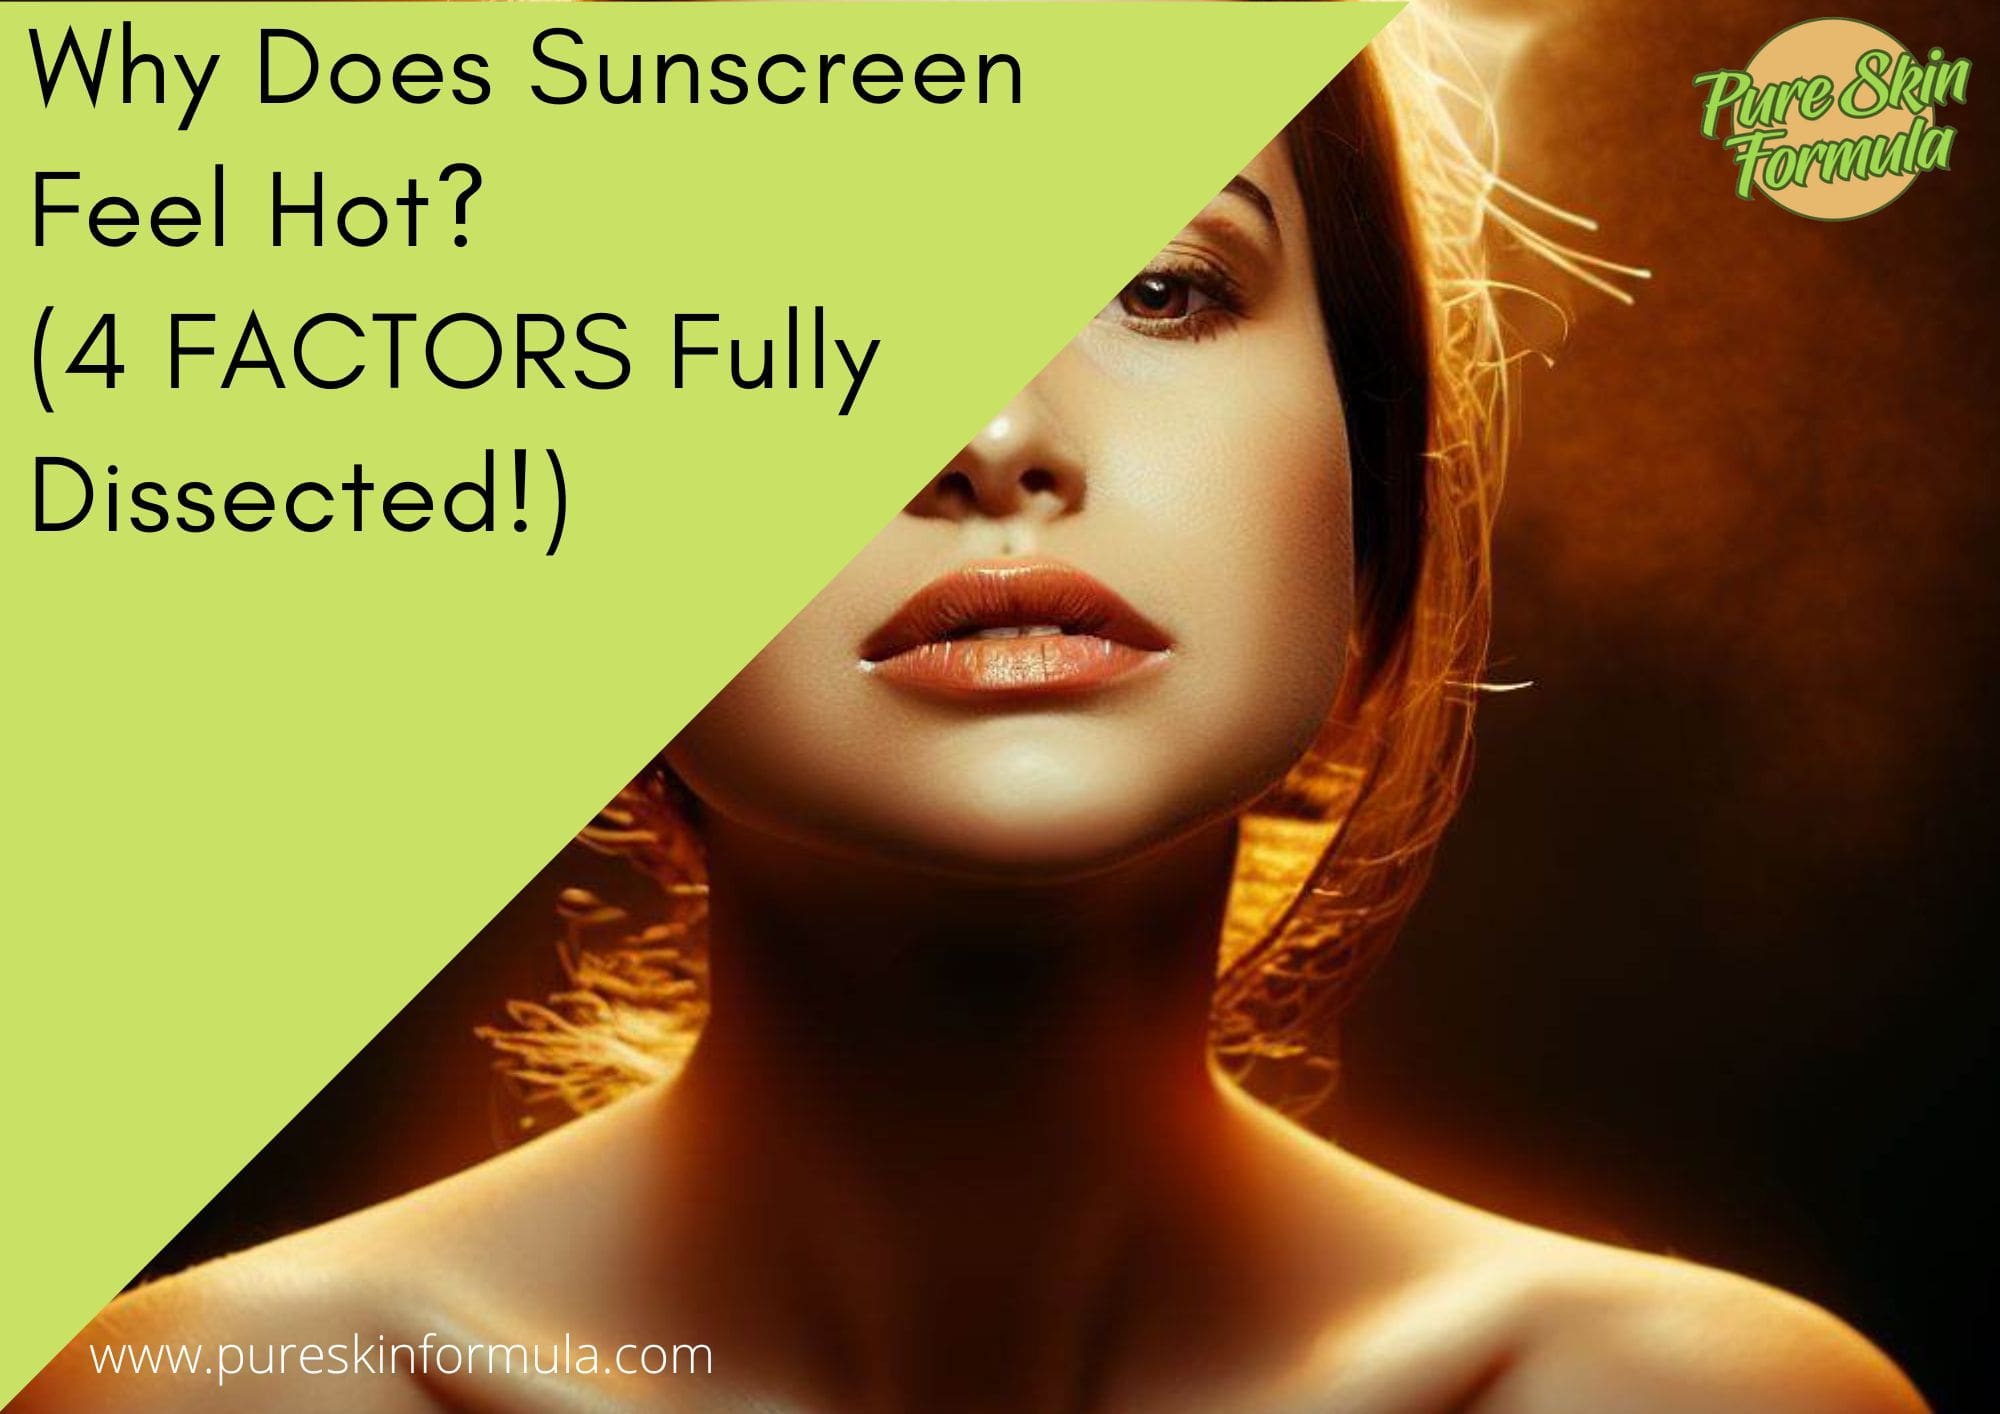 Why Does Sunscreen Feel Hot? (4 FACTORS Fully Dissected!)